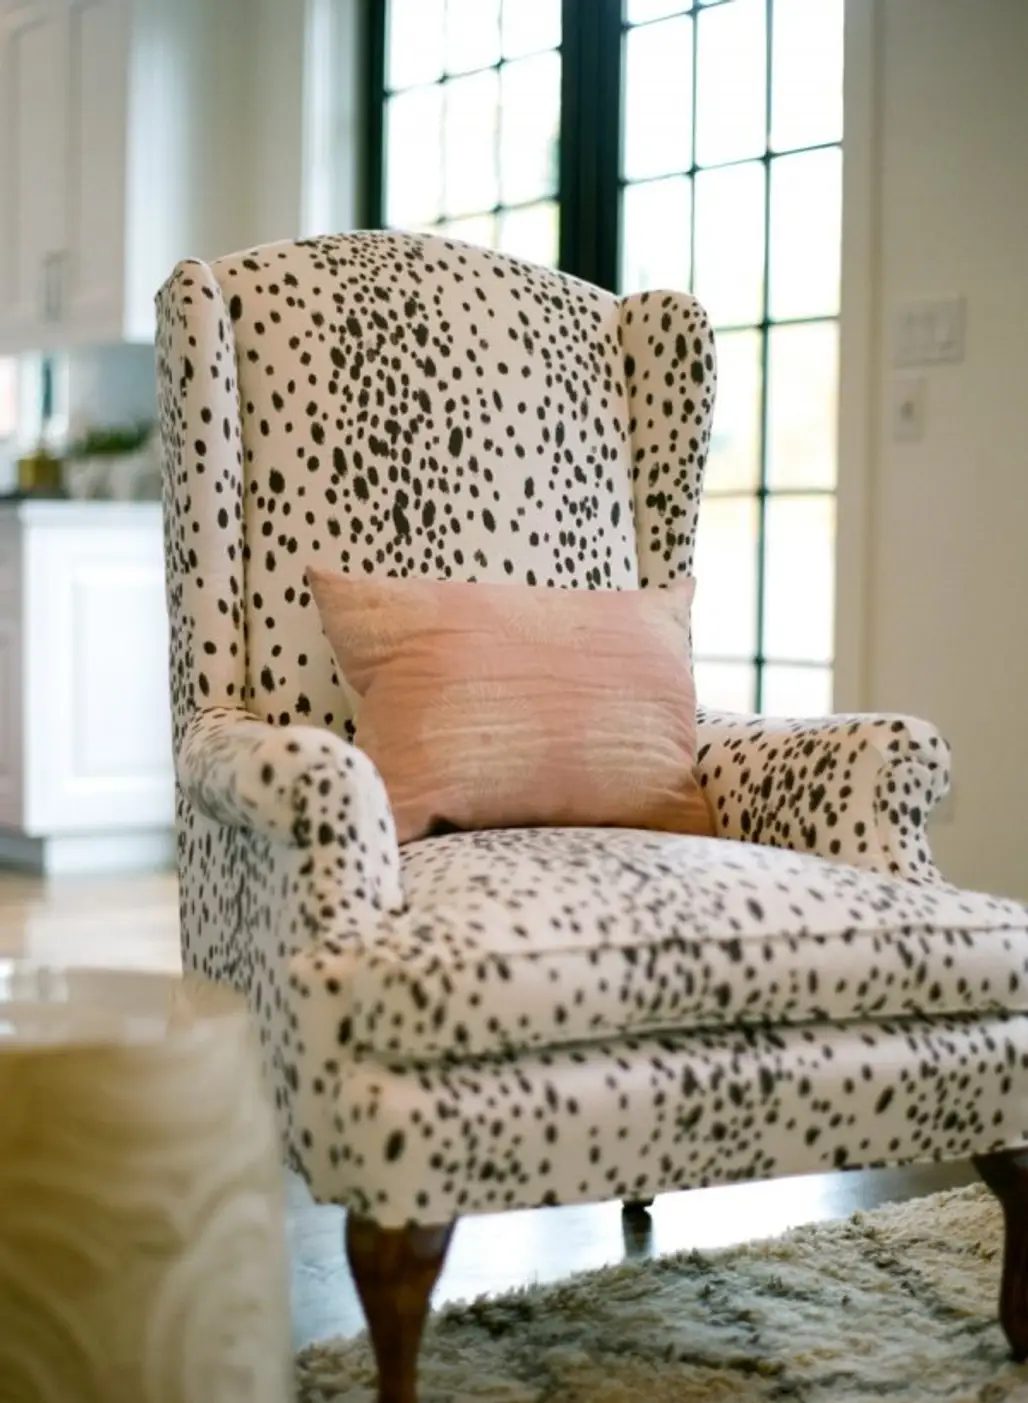 Black and White Spotted Chair